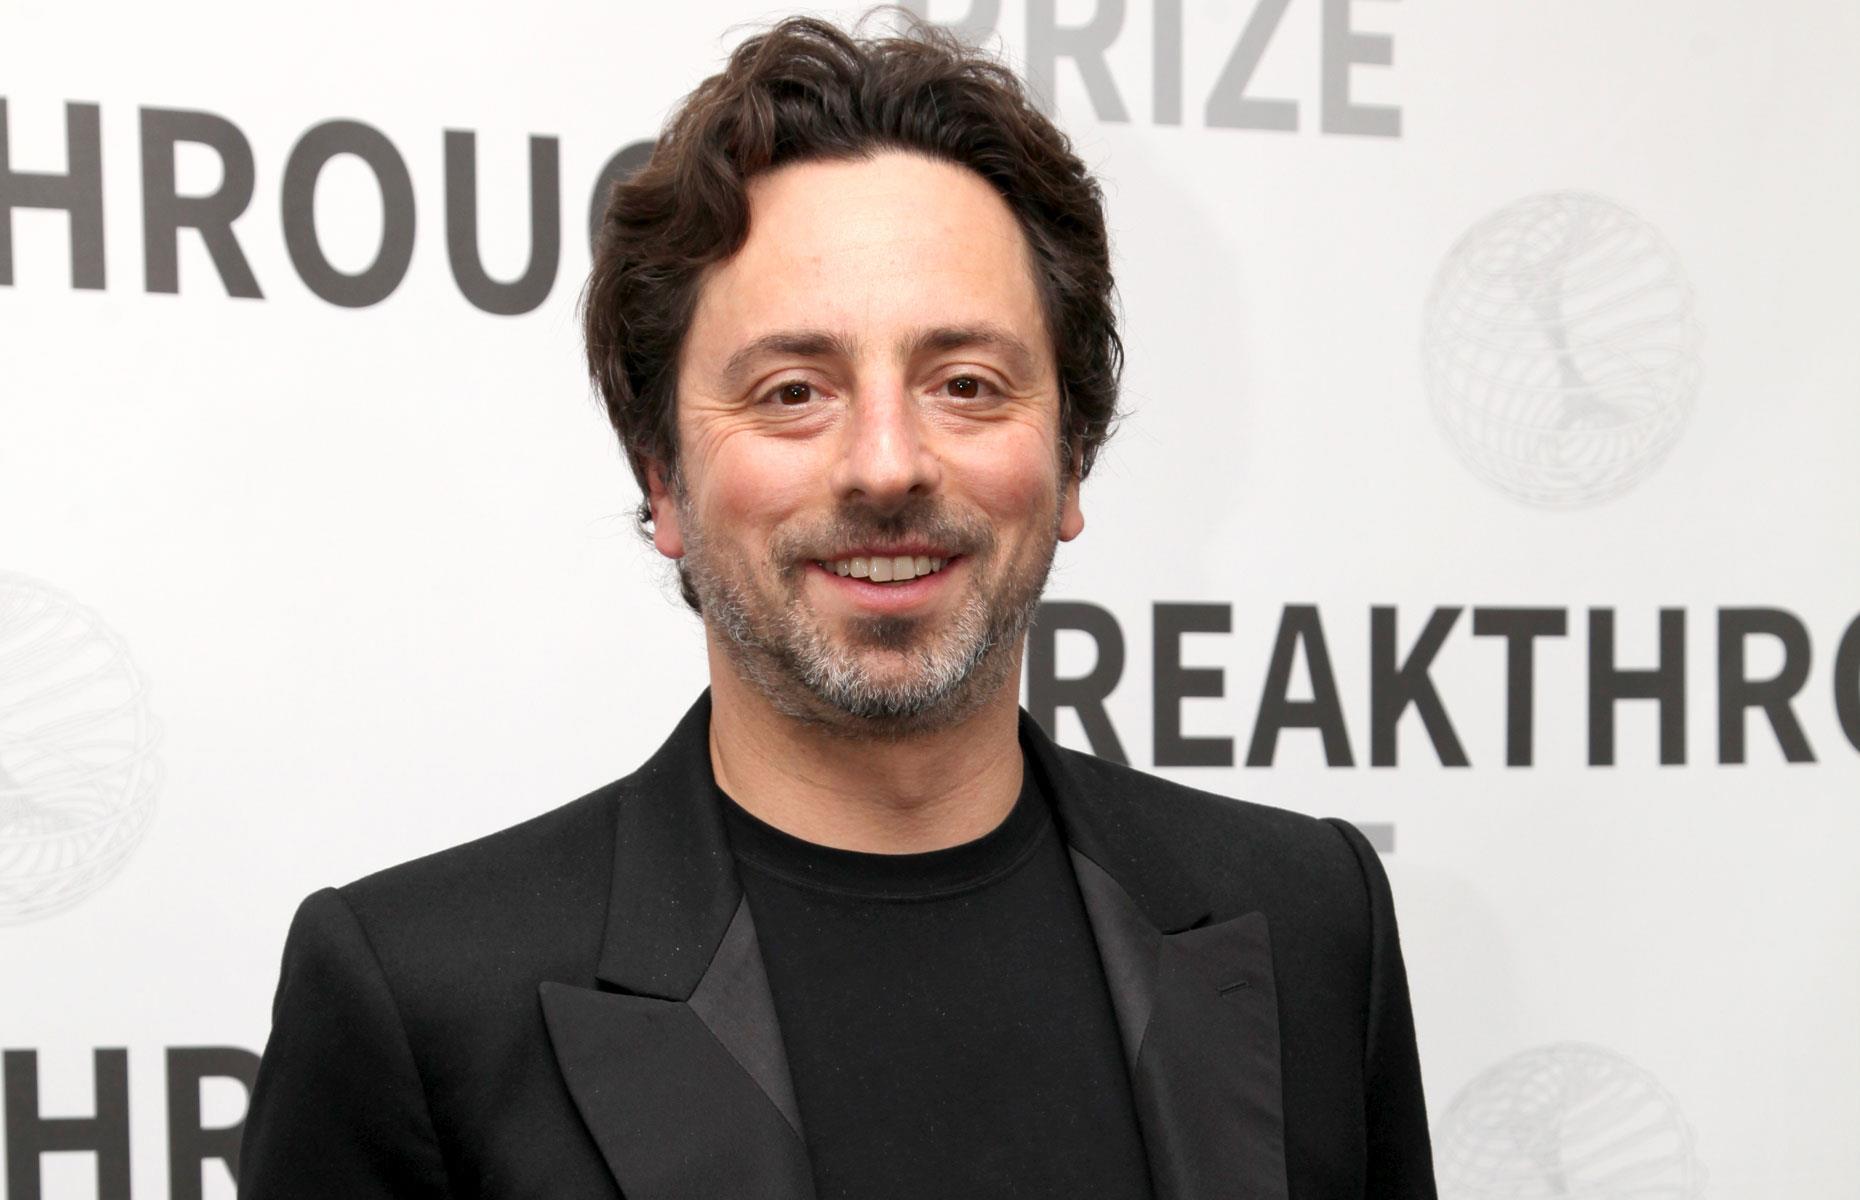 <p>Computer scientist Sergey Brin co-founded Google with Larry Page back in 1998.</p>  <p>At the time of writing, his net worth stands at $100.6 billion.</p>  <p>Brin's ex-wife Anne Wojcicki, with whom he has two children, is the co-founder and CEO of personal genomics firm 23andMe. She's independently worth $300 million.</p>